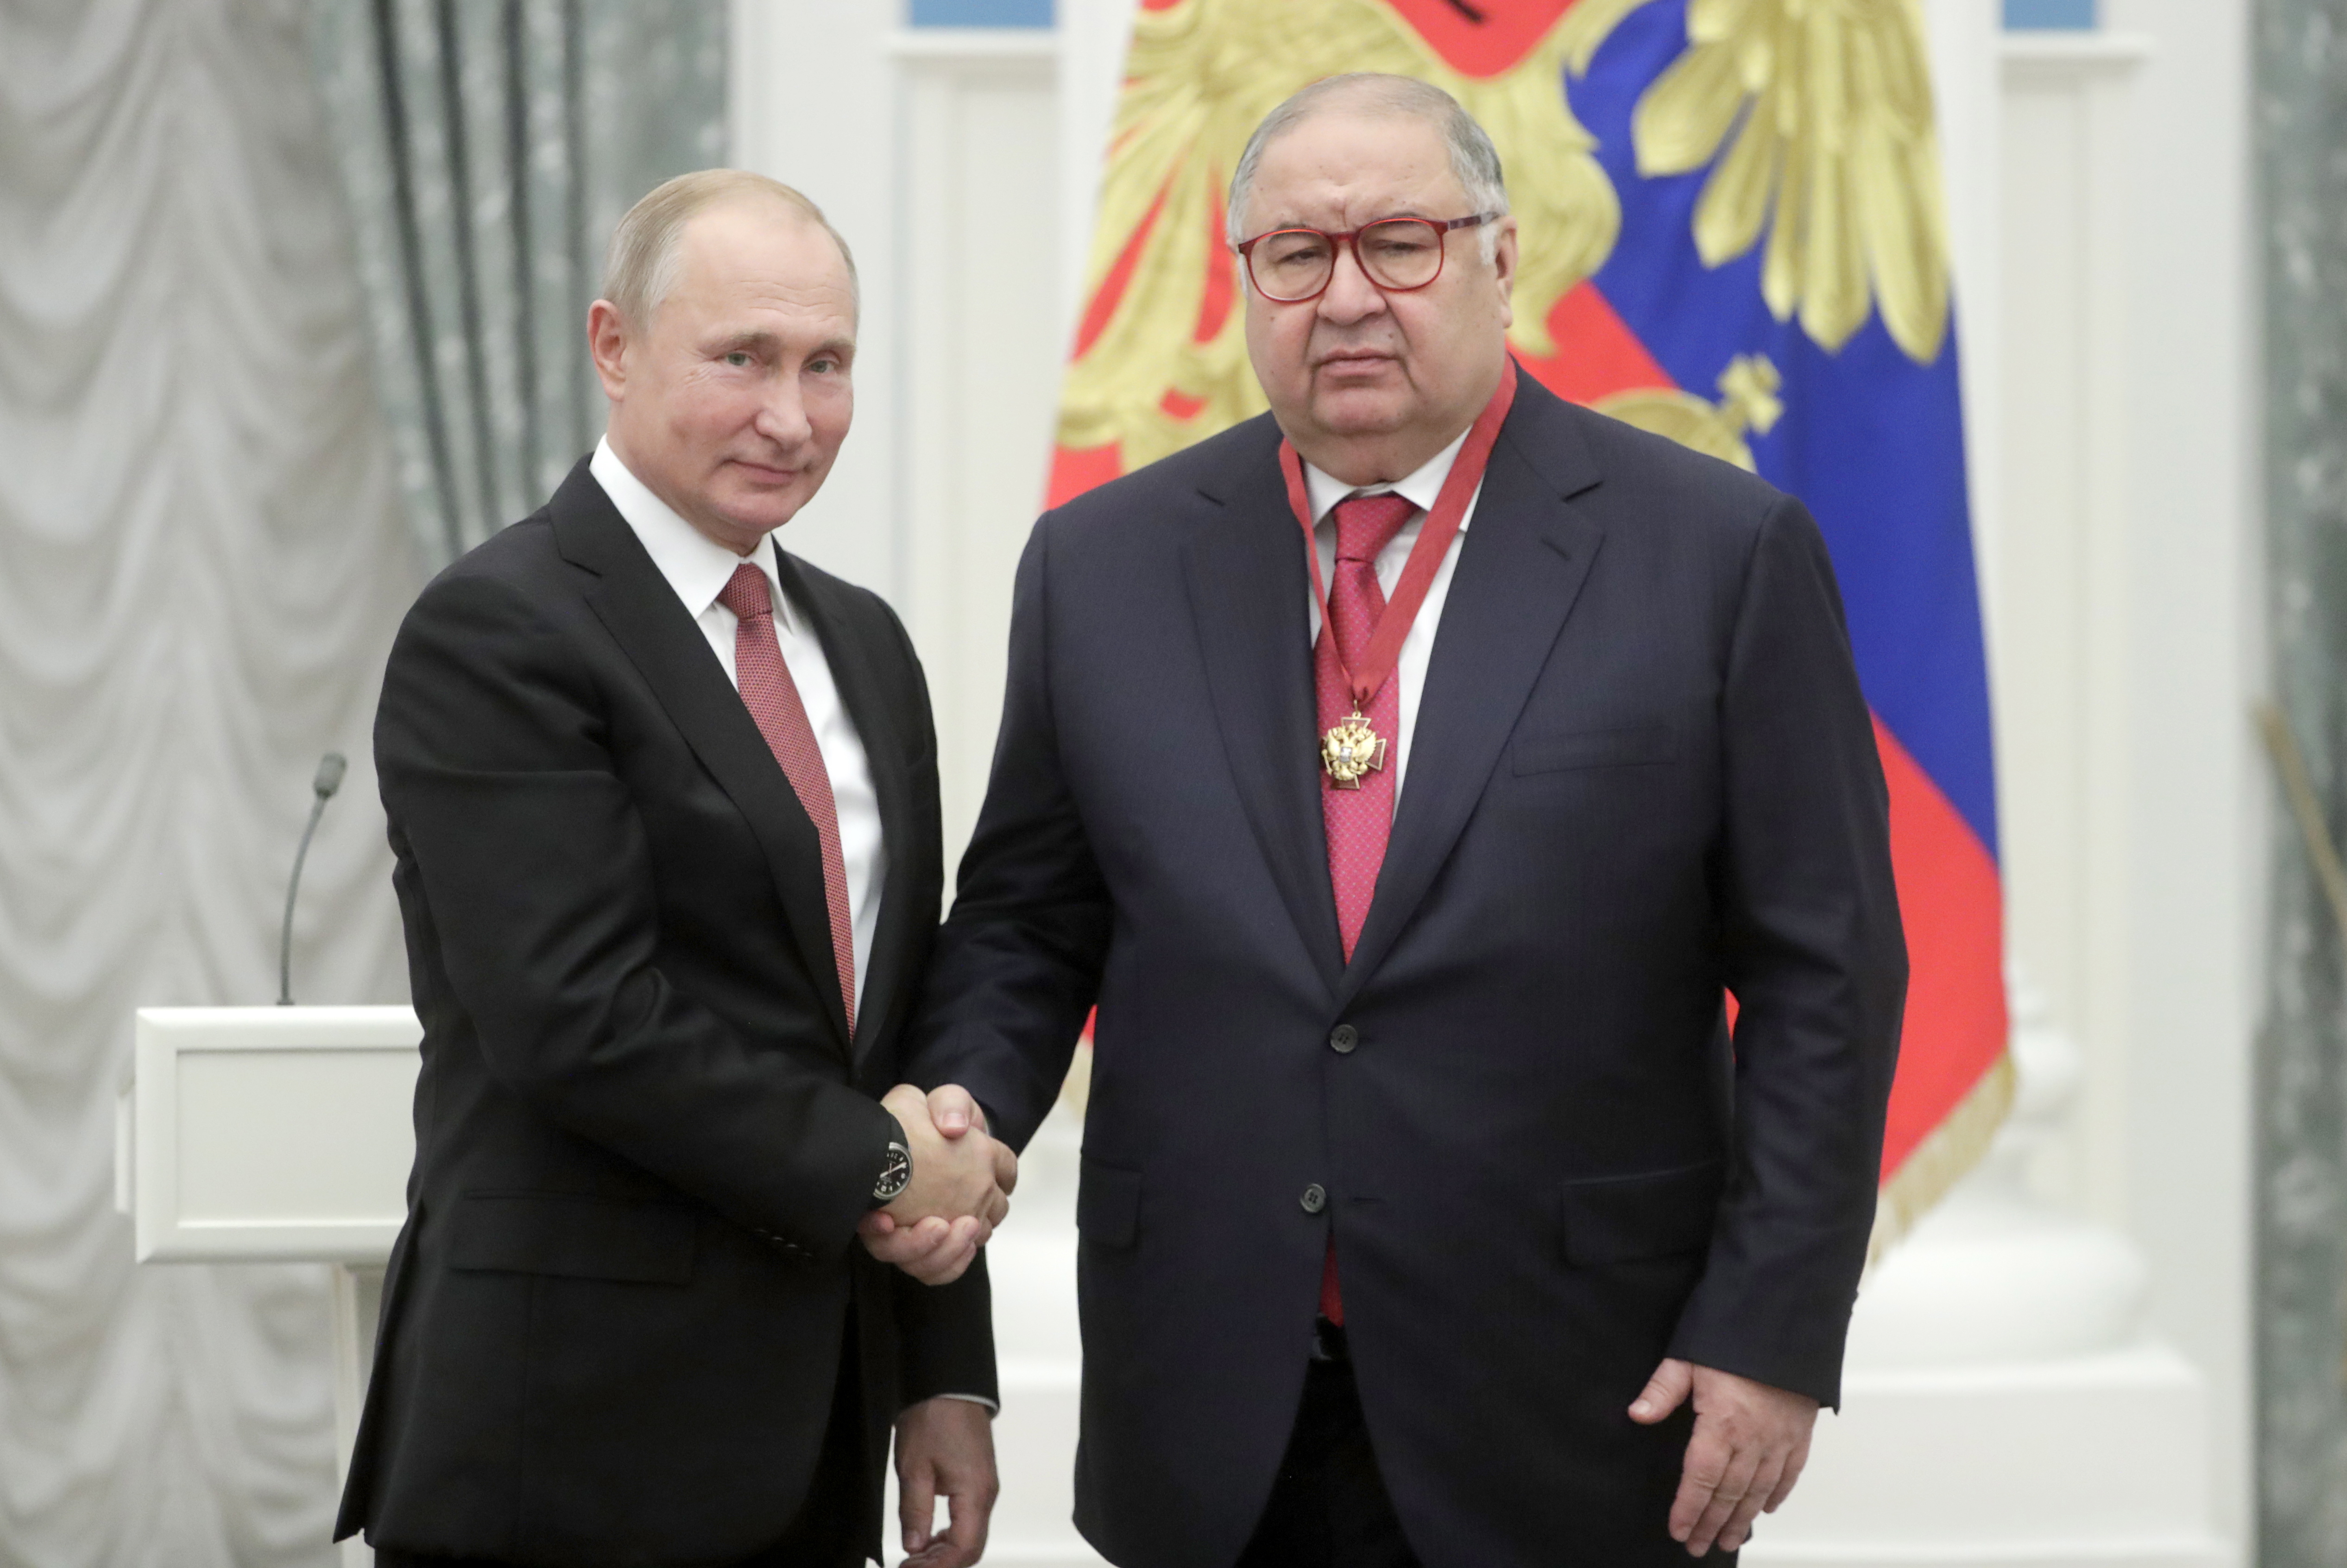 Businessman, Alisher Usmanov (R), receives Russia's Order of Merit for the Fatherland (3rd class) from the President of Russia, Vladimir Putin, at a ceremony in the Kremlin, in Moscow, Russia, on November 27, 2018.